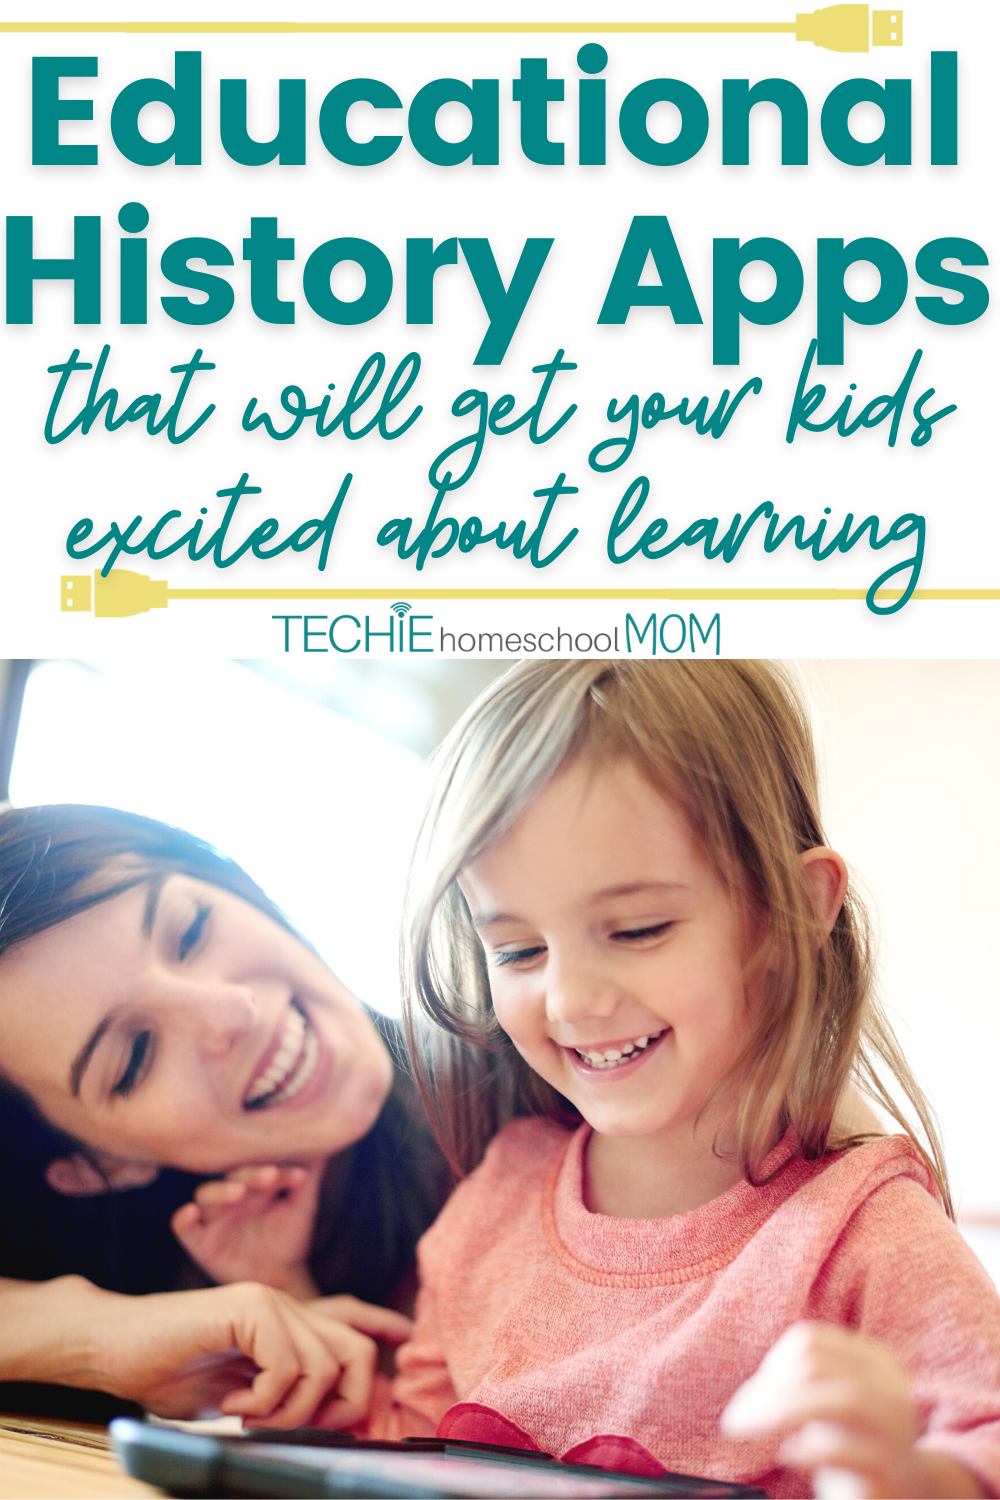 The easiest way to get a kid to learn something nowadays is to hand them your phone, right? No complaints. Try out these history apps to help your kids with their social studies lessons.